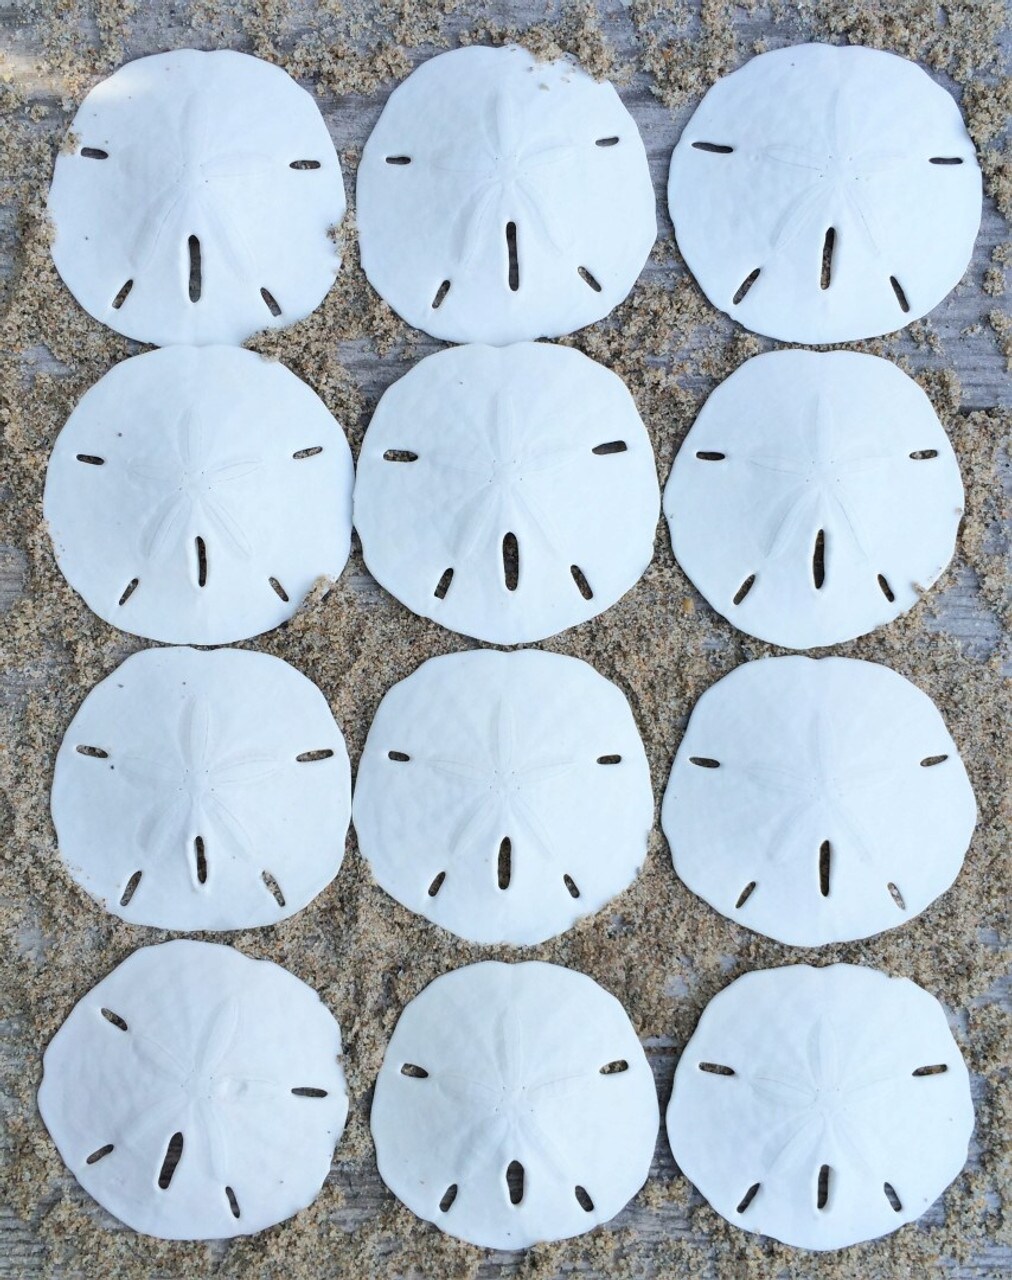  Tumbler Home White Sand Dollars 2 to 2.25 Set of 12 - Wedding  Seashell Craft Sand Dollars- Hand Picked and Professionally Packed : Toys &  Games